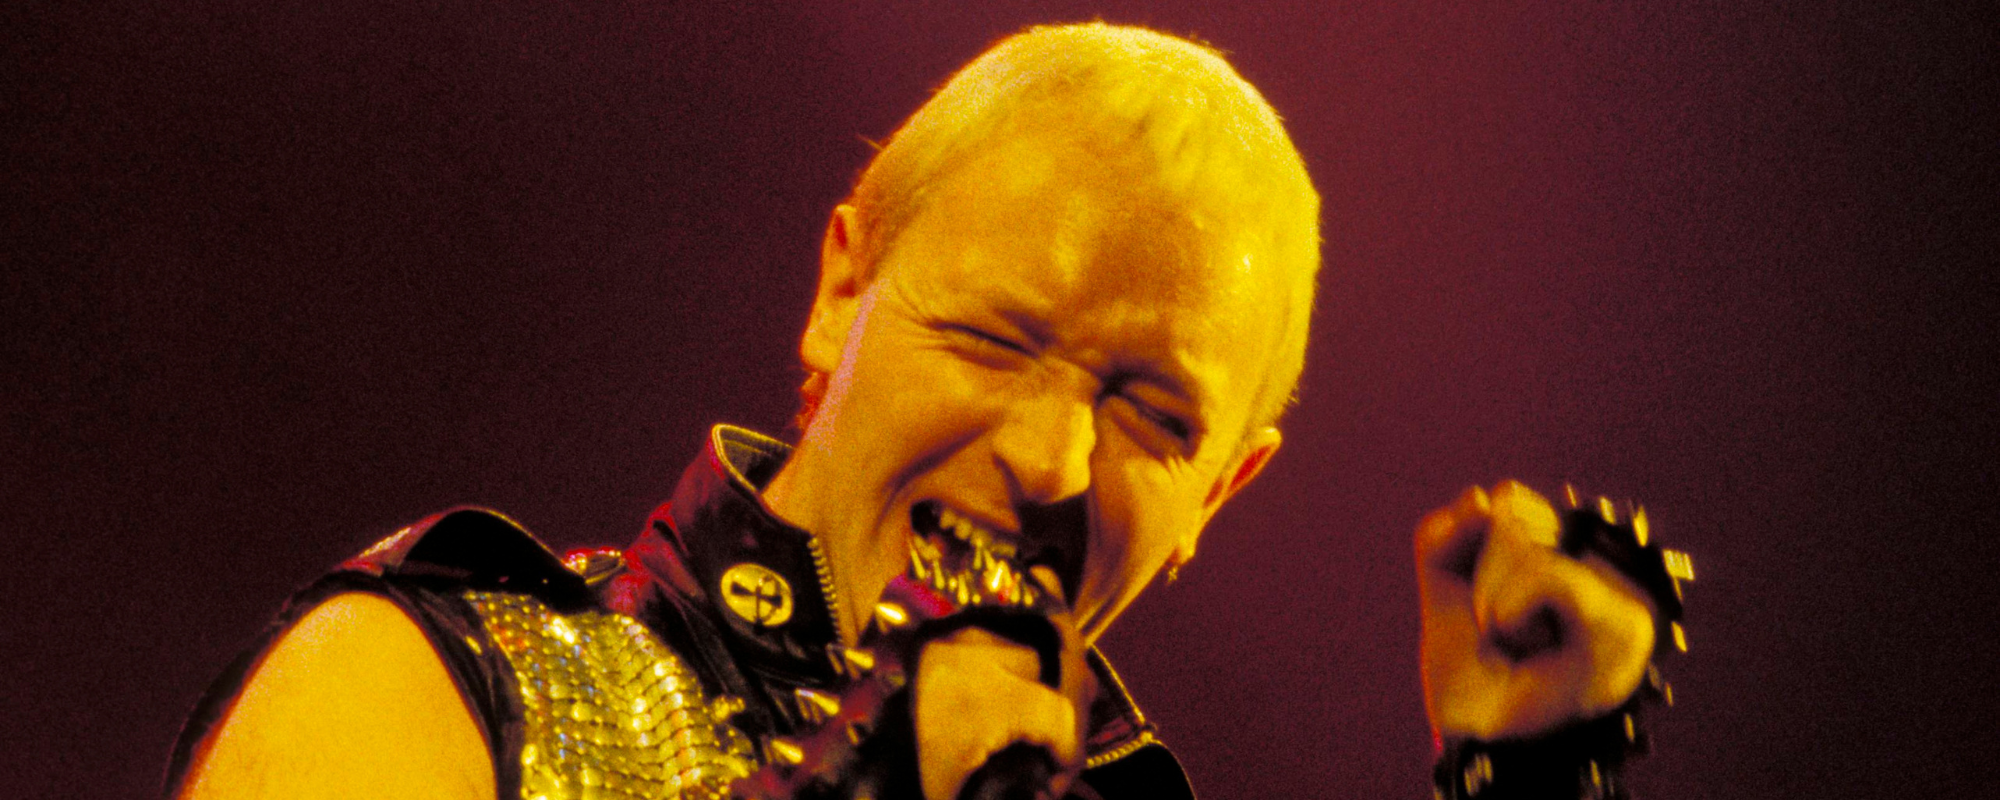 The Meaning Behind Judas Priest’s Ode to Solidarity, “Breaking the Law”